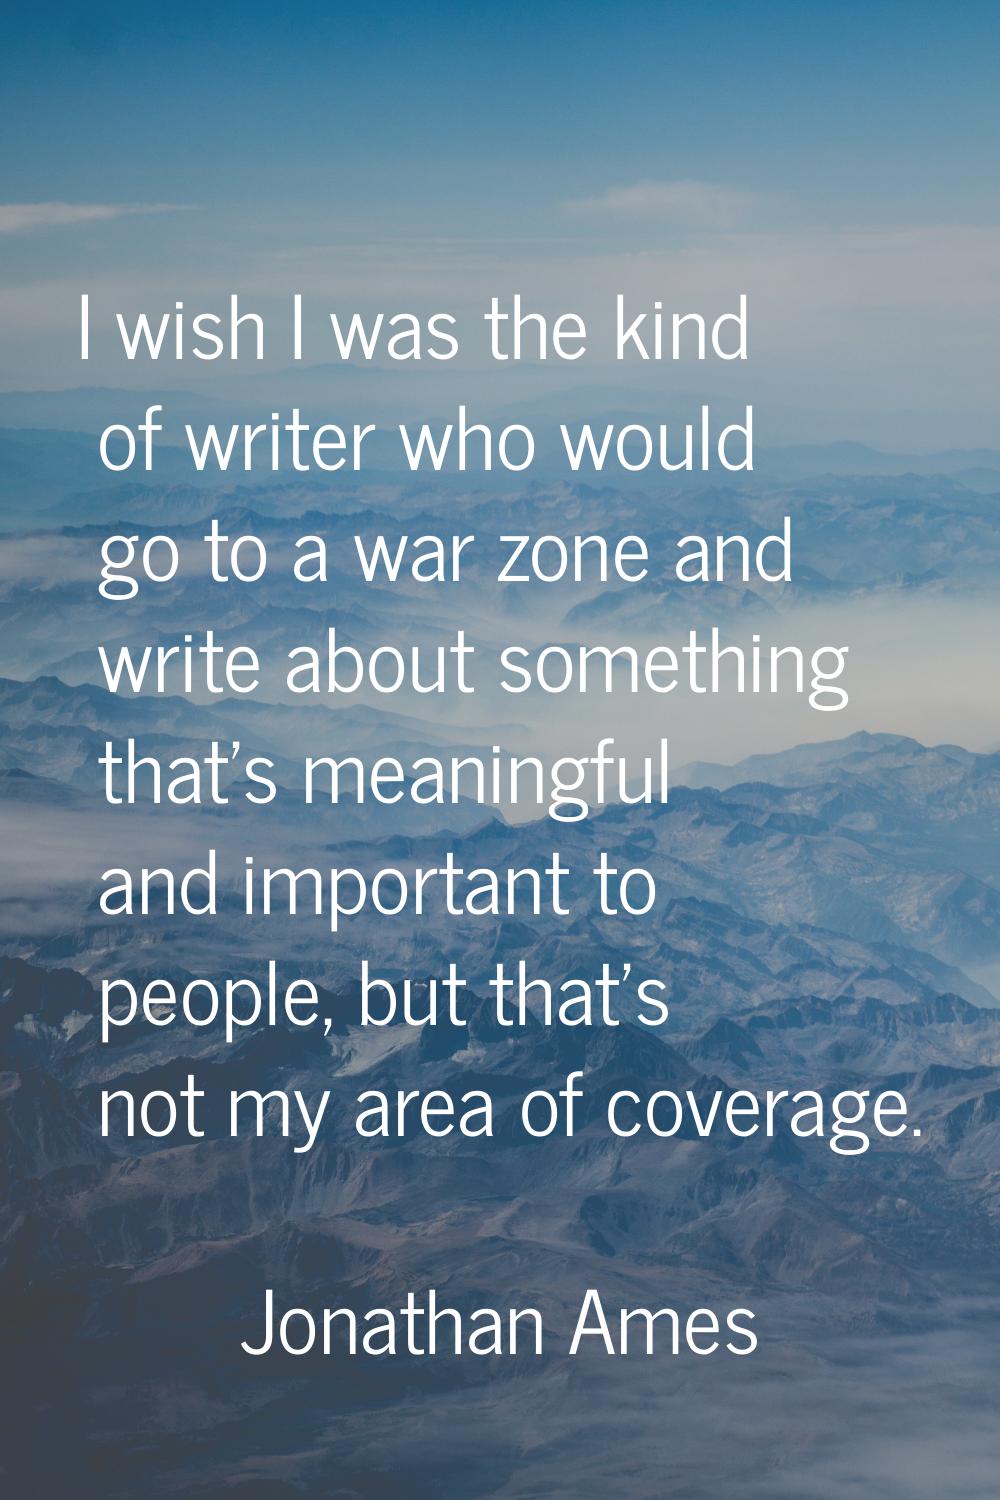 I wish I was the kind of writer who would go to a war zone and write about something that's meaning